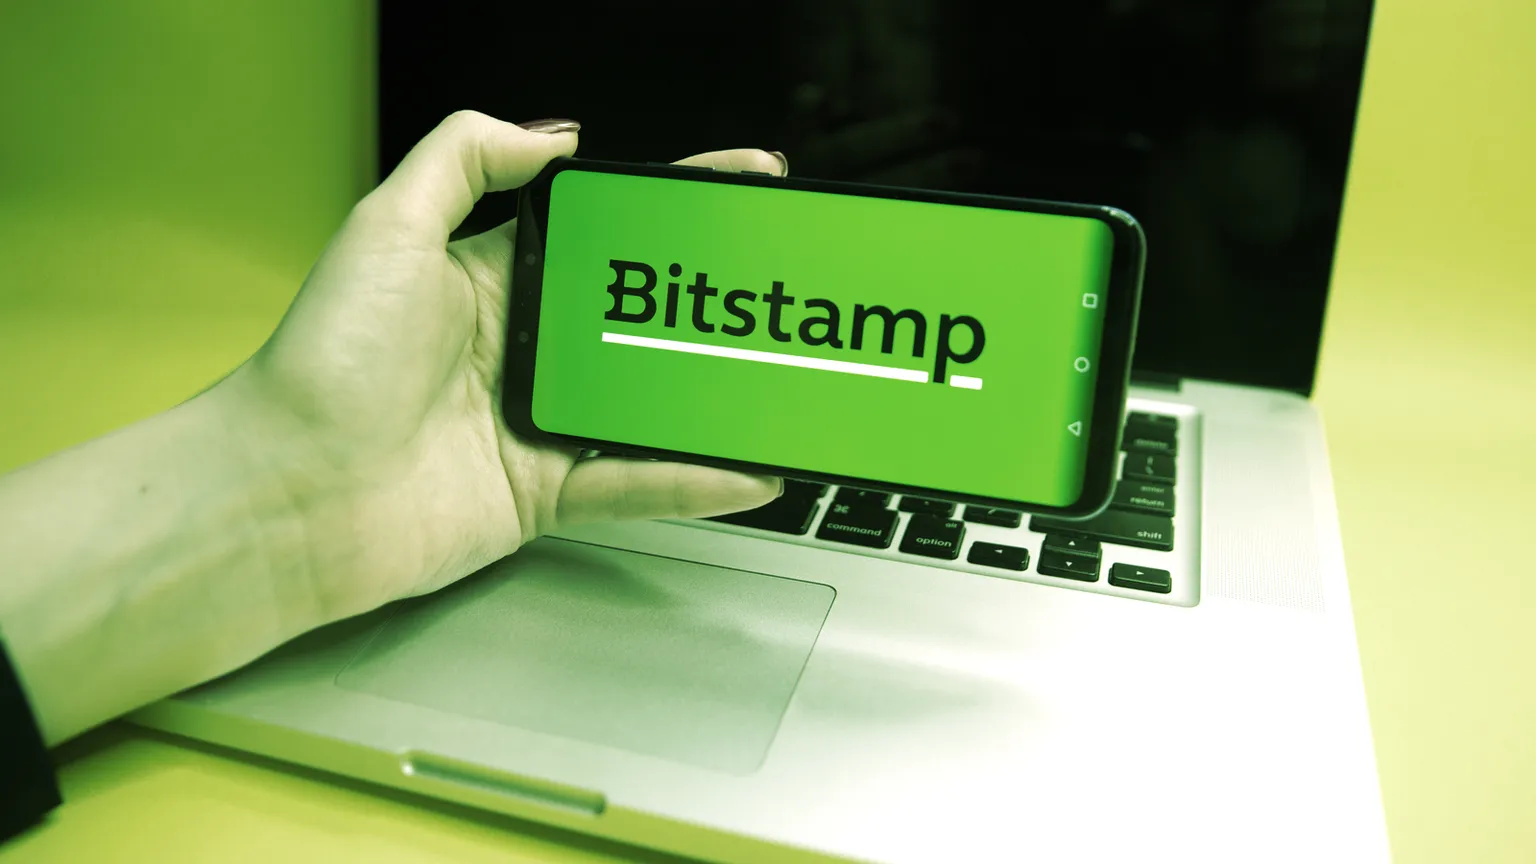 Bitstamp is a cryptocurrency exchange headquartered in the UK. Image: Shutterstock